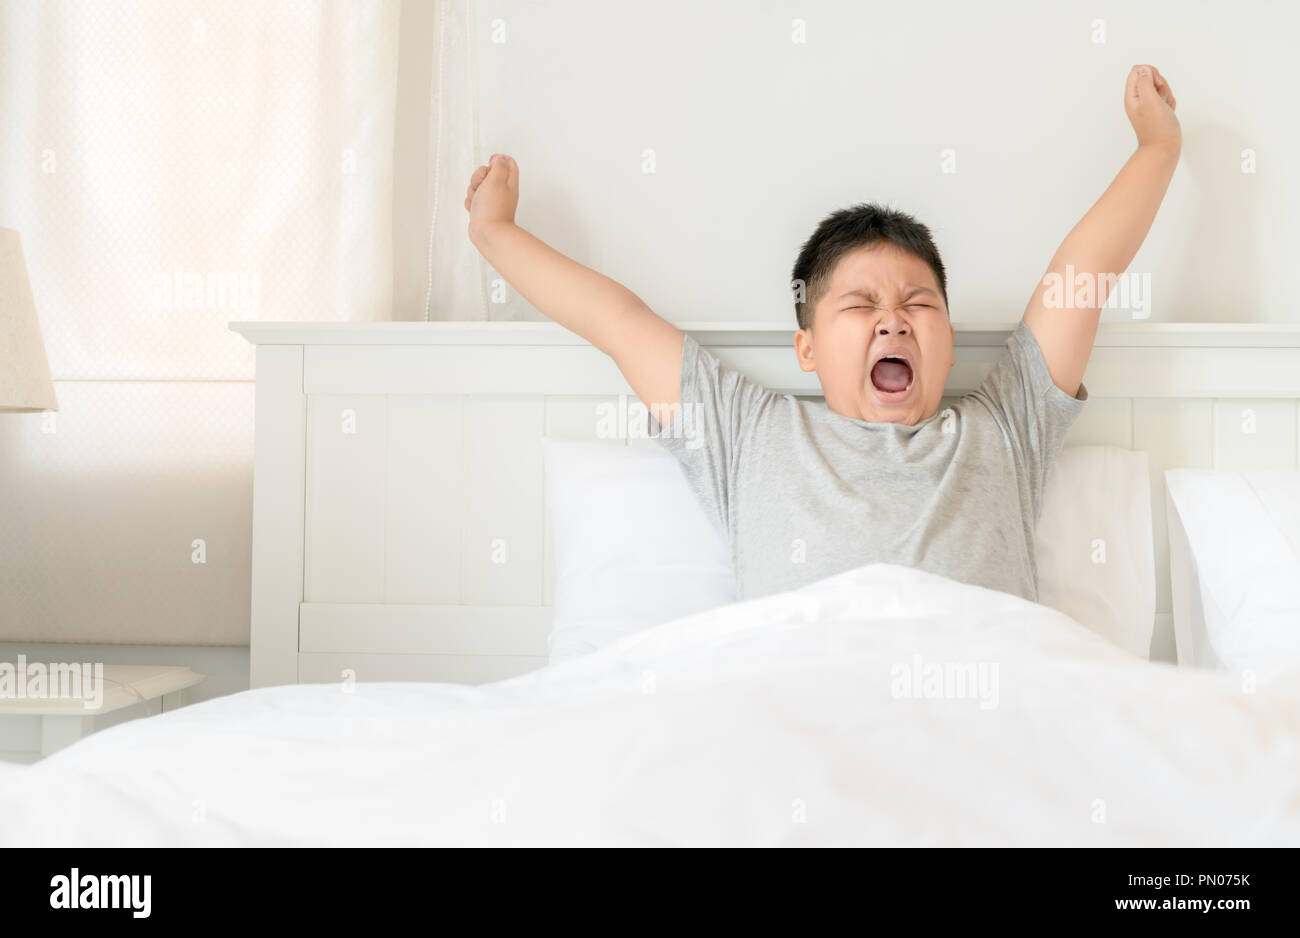 Obese boy wake up yawning and stretch on bed in morning. lazy concept Stock Photo